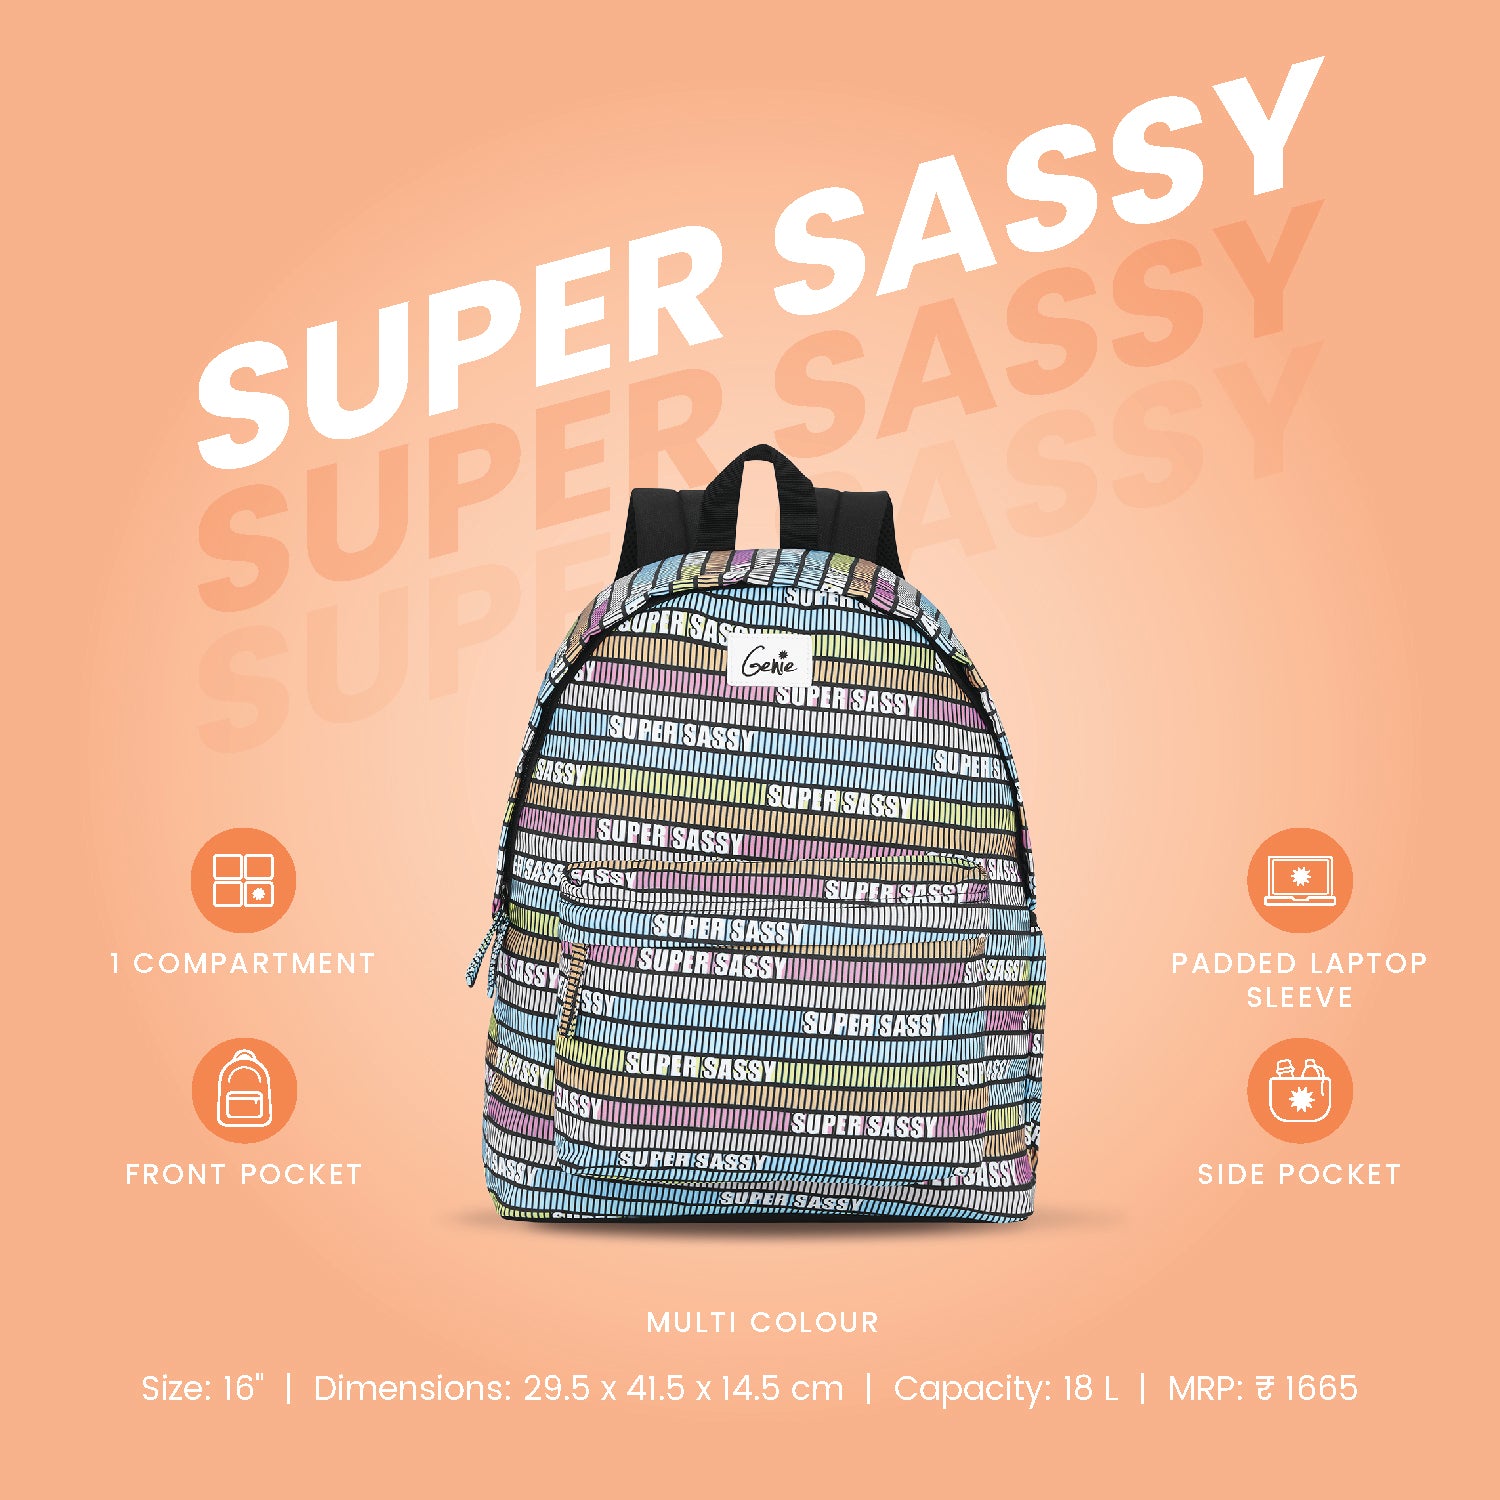 Super Sassy Casual Backpack - Multicolor